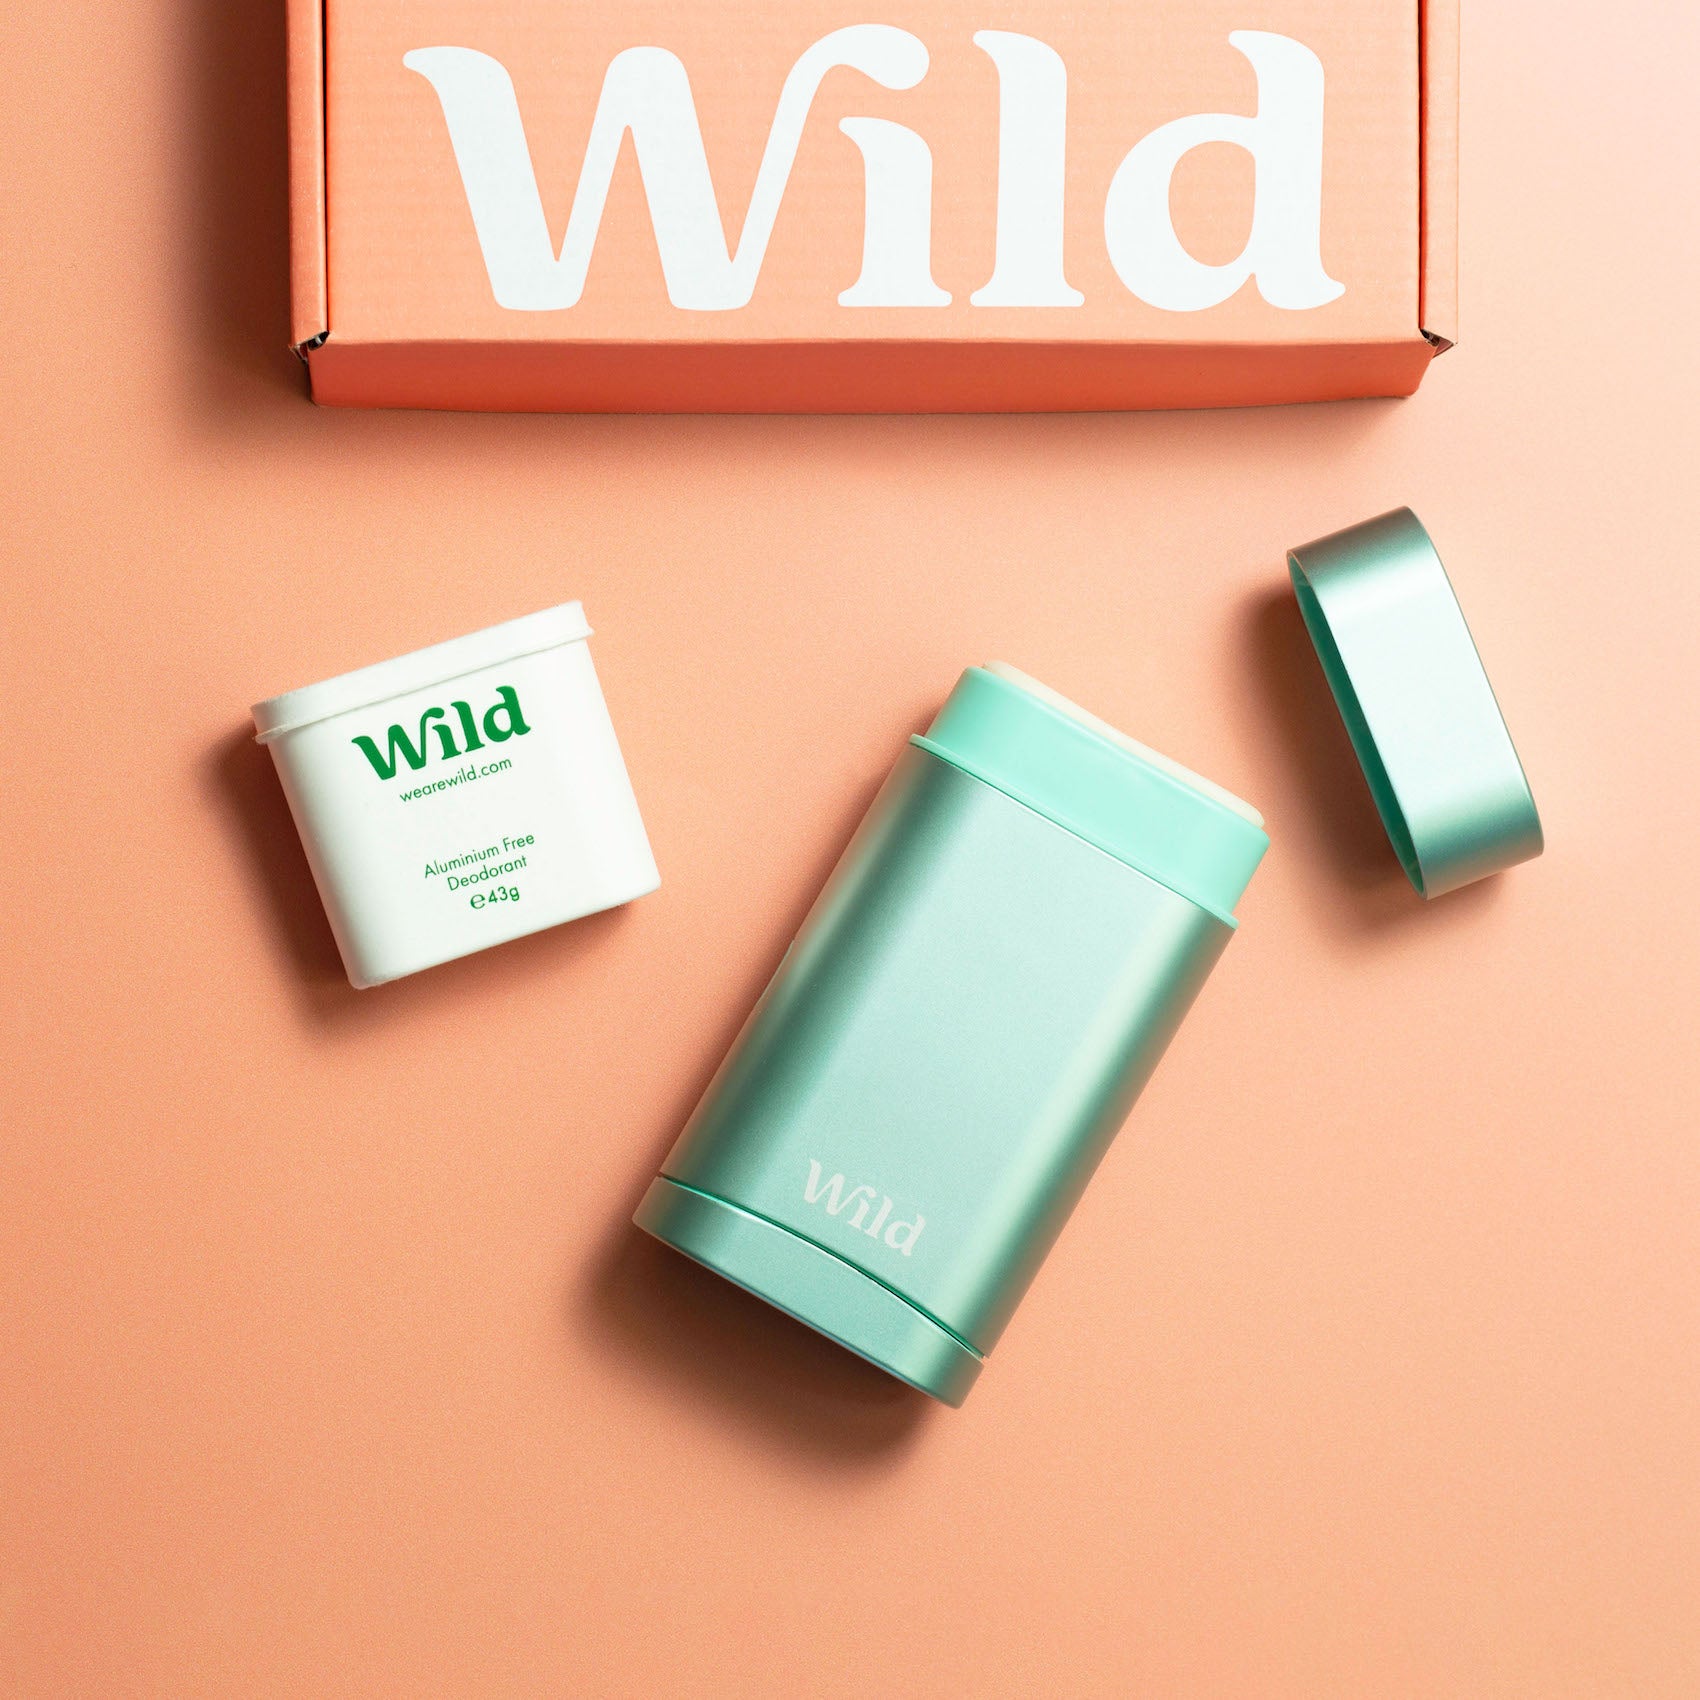 Get Wild this summer with the UK's number one plastic-free natural deodorant